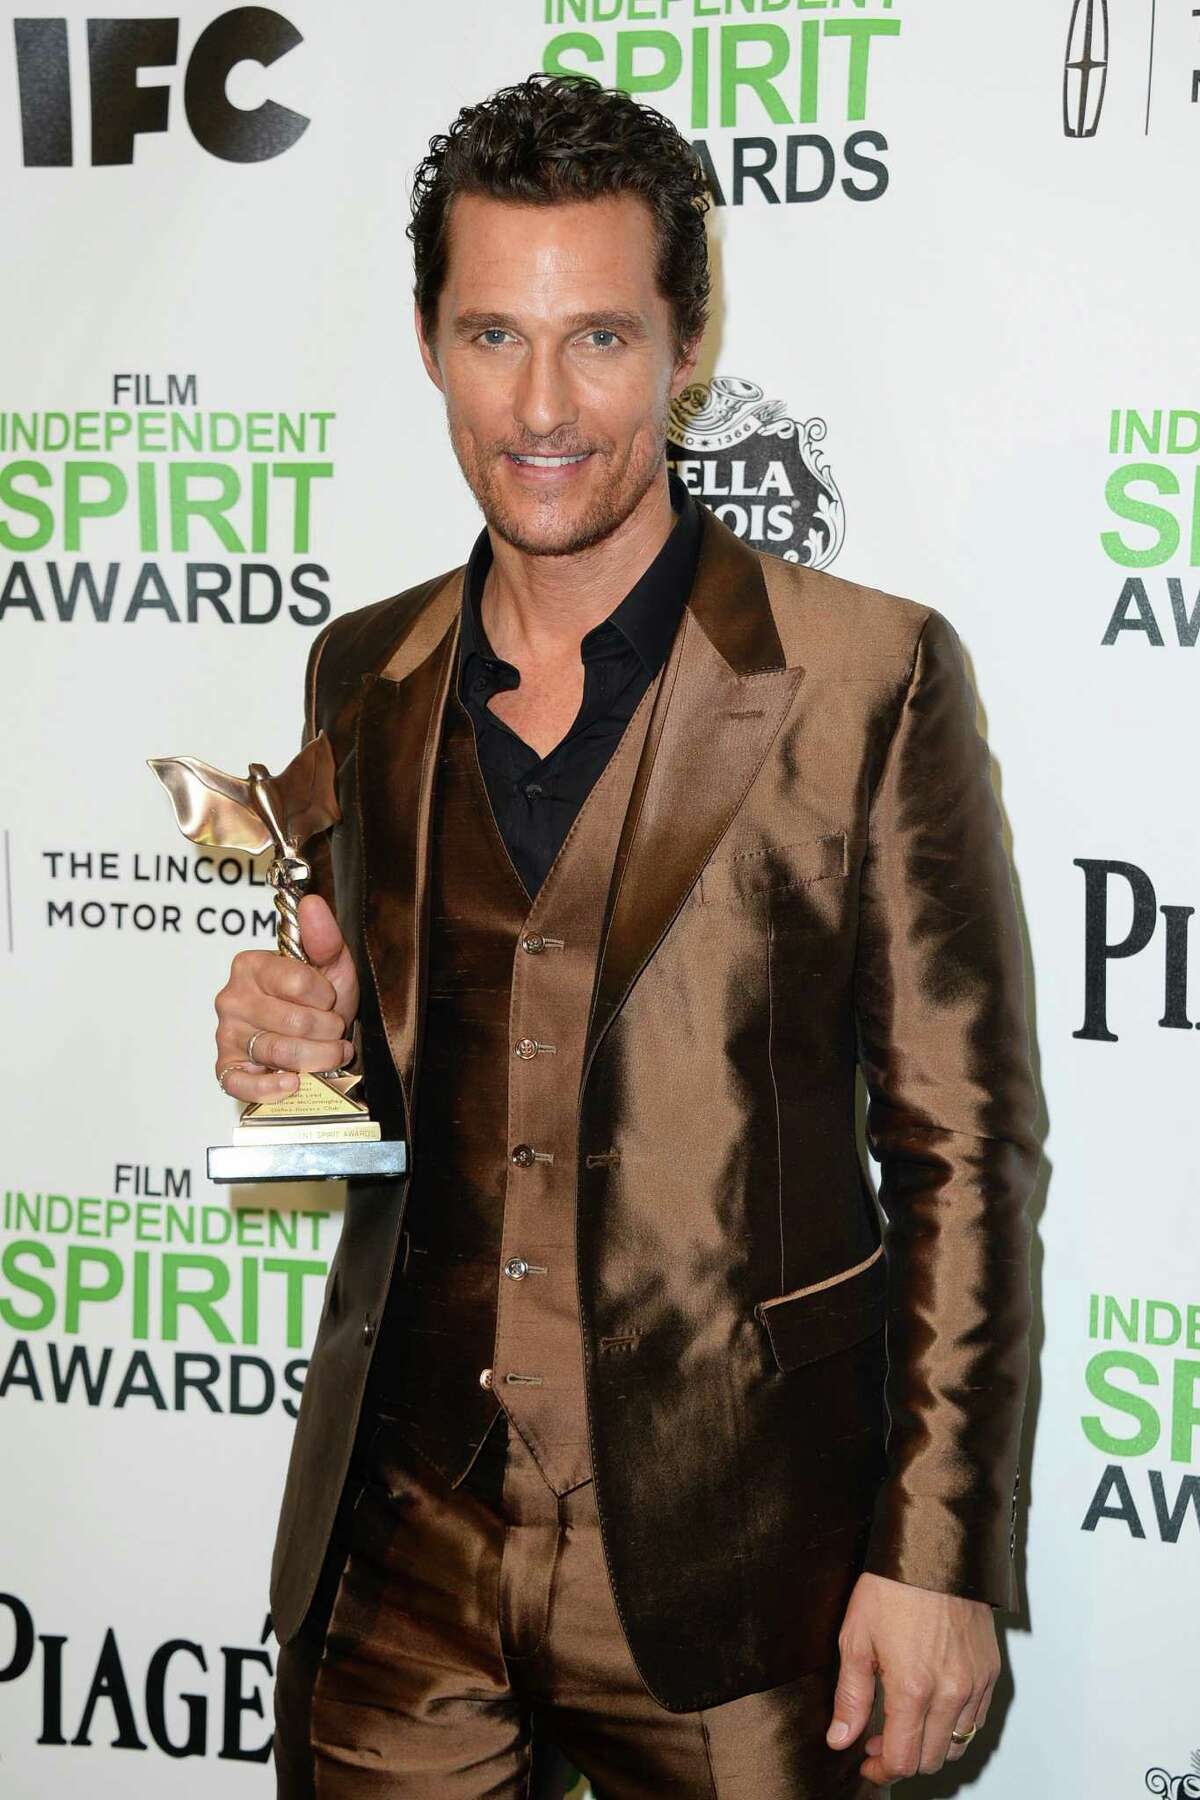 Matthew McConaughey poses with the award for best male lead for "Dallas Buyers Club" in the press room at the 2014 Film Independent Spirit Awards, on Saturday, March 1, 2014, in Santa Monica, Calif. (Photo by Jordan Strauss/Invision/AP)